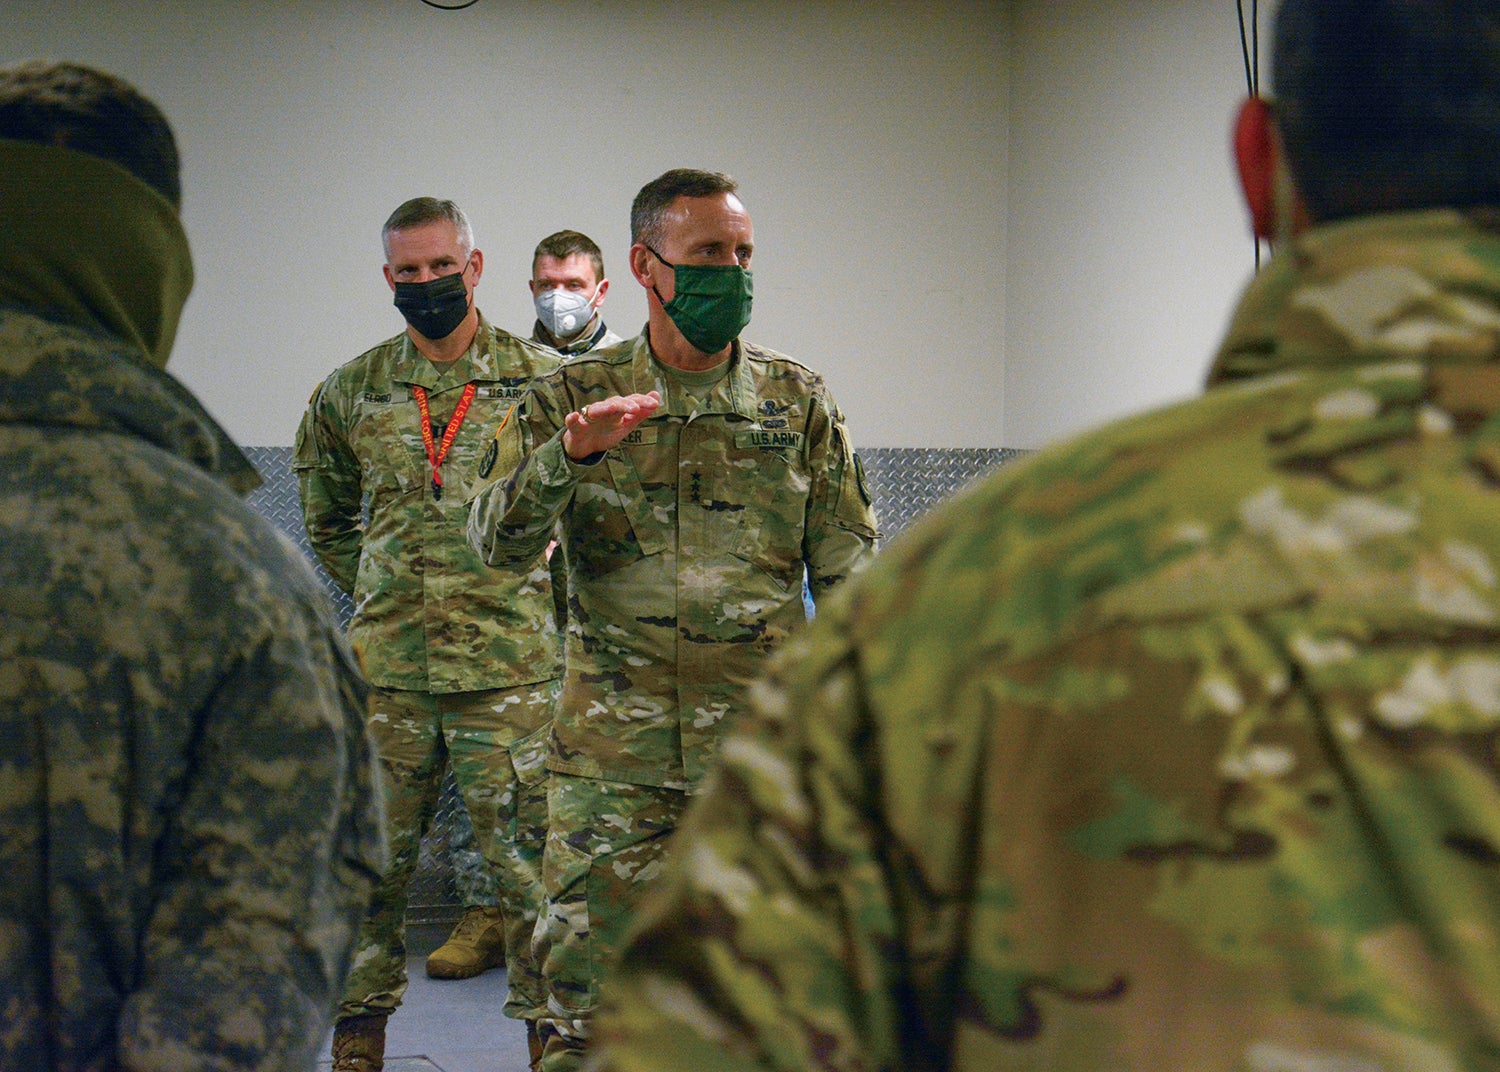 Lt. Gen. Daniel Karbler, commander of the U.S. Army Space and Missile Defense Command, visits soldiers at Fort Greely, Alaska. (Credit: U.S. Army)